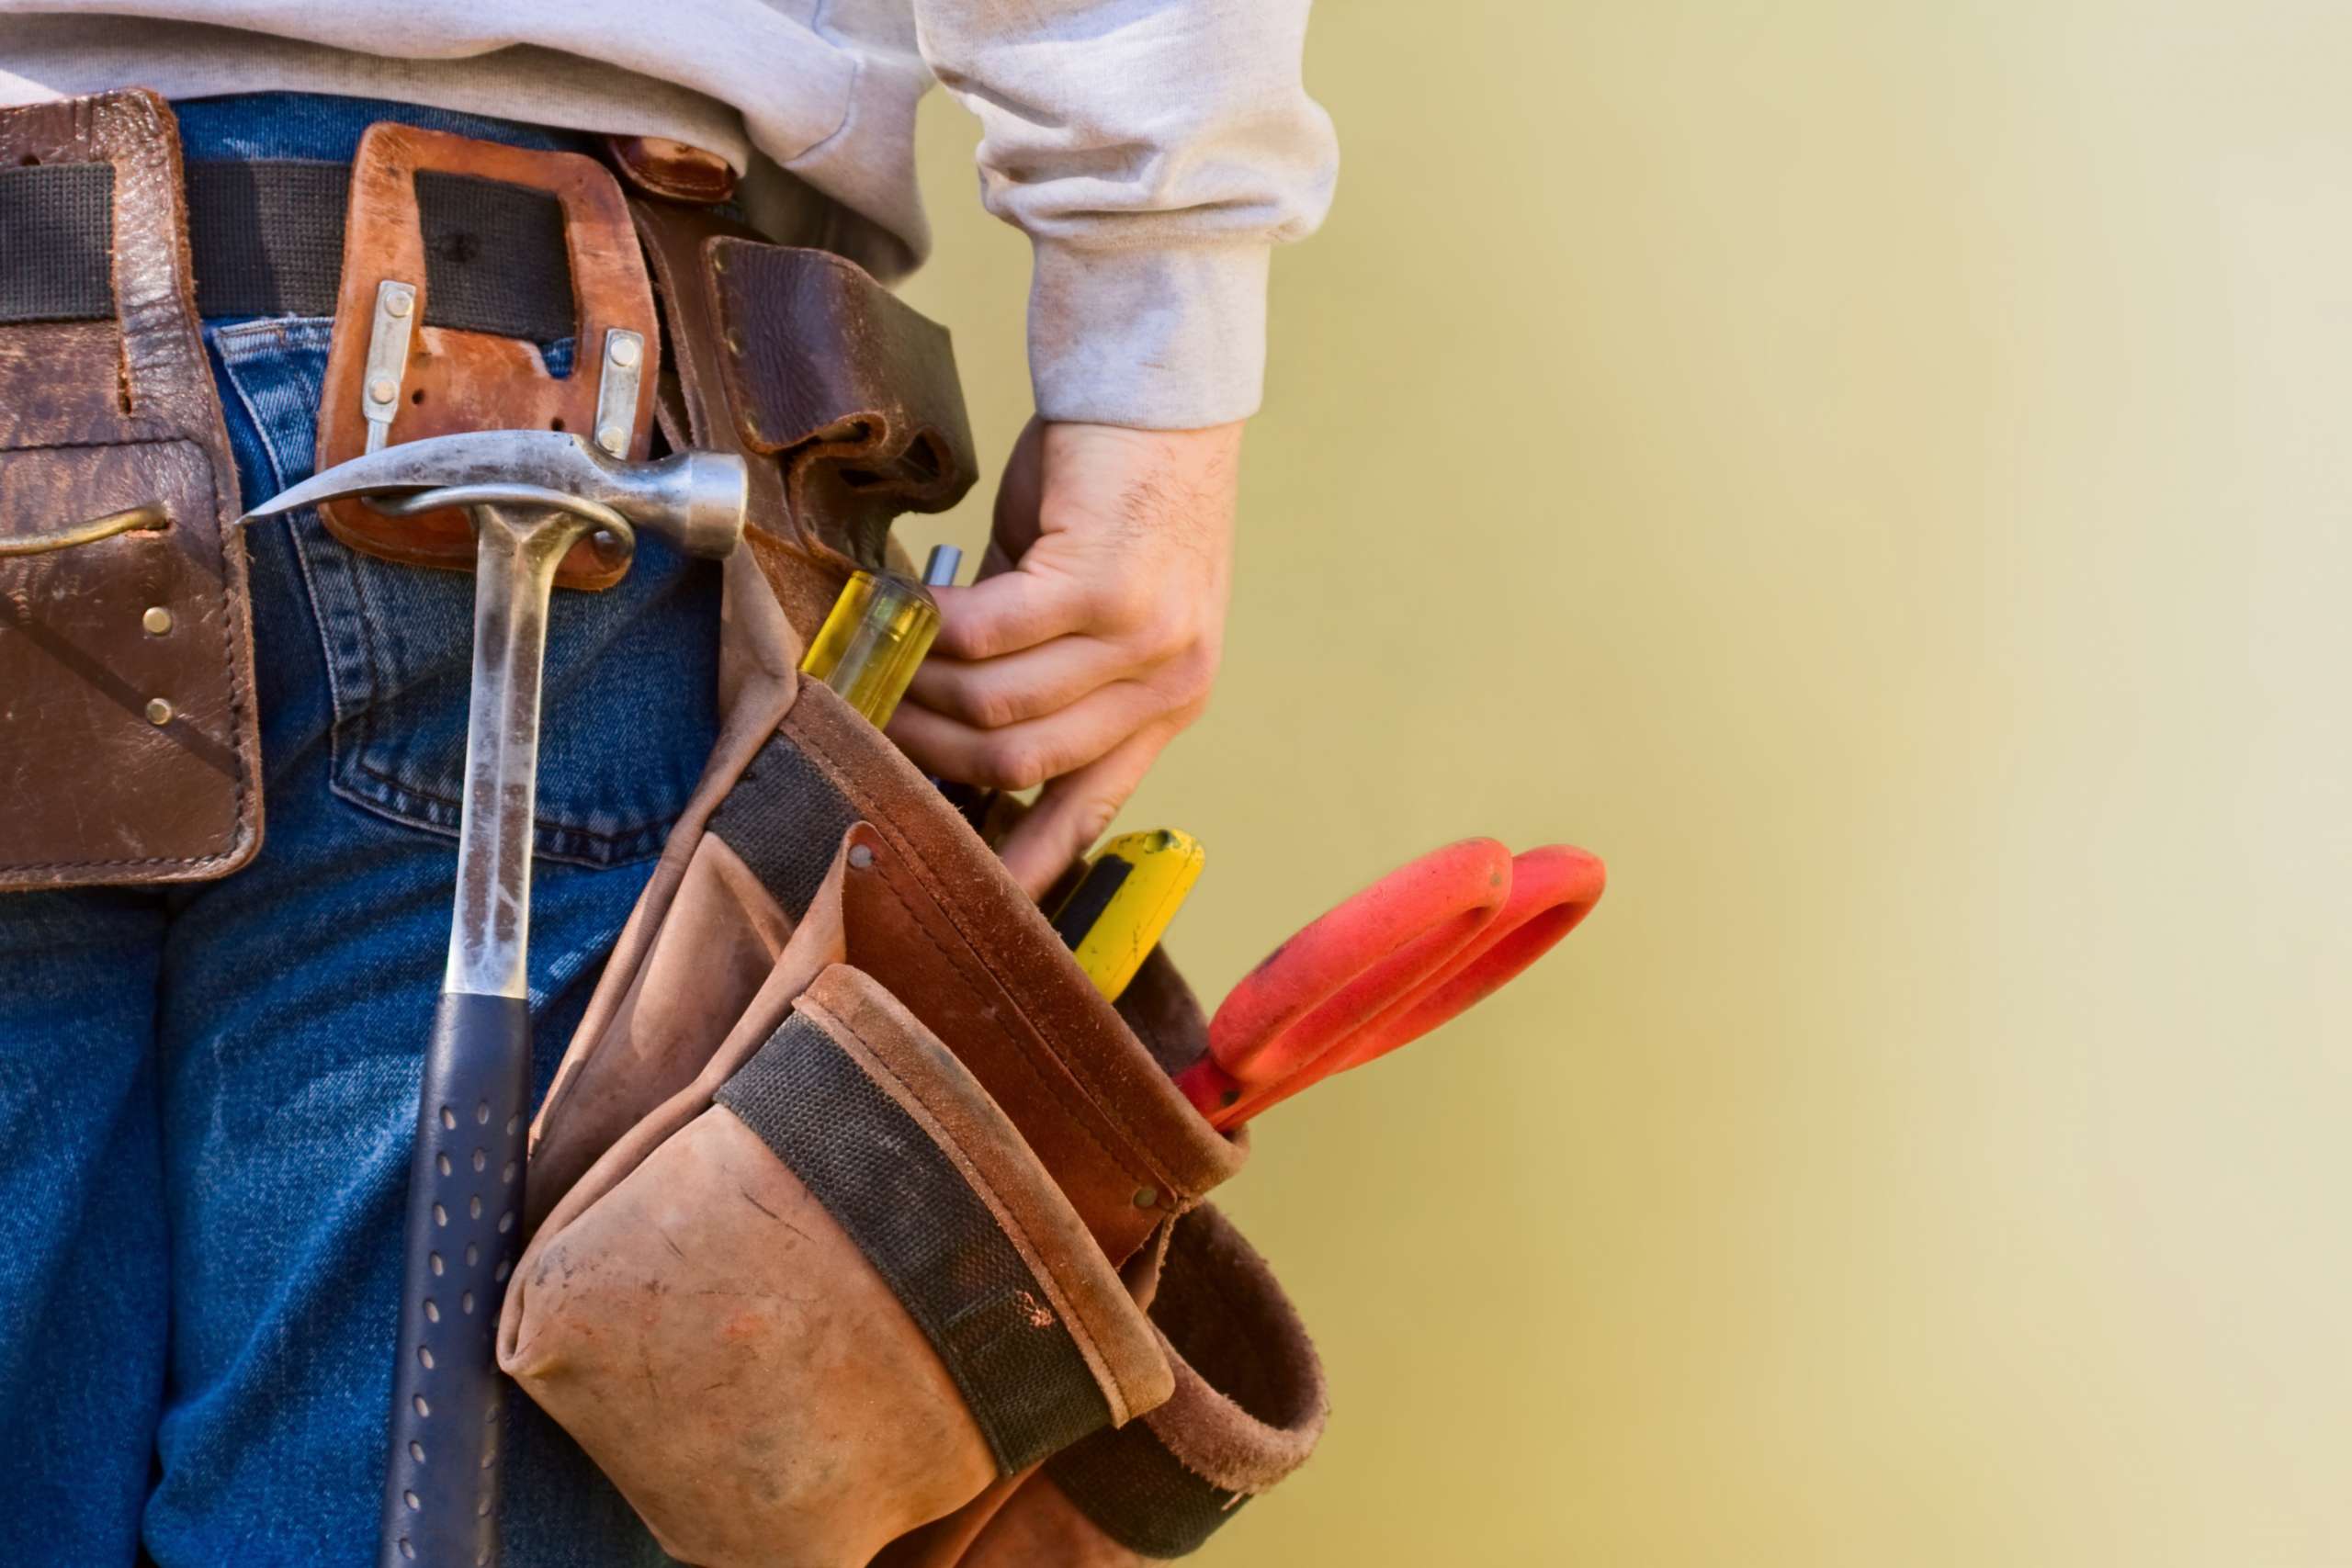 Handyman with tools in tool-belt.